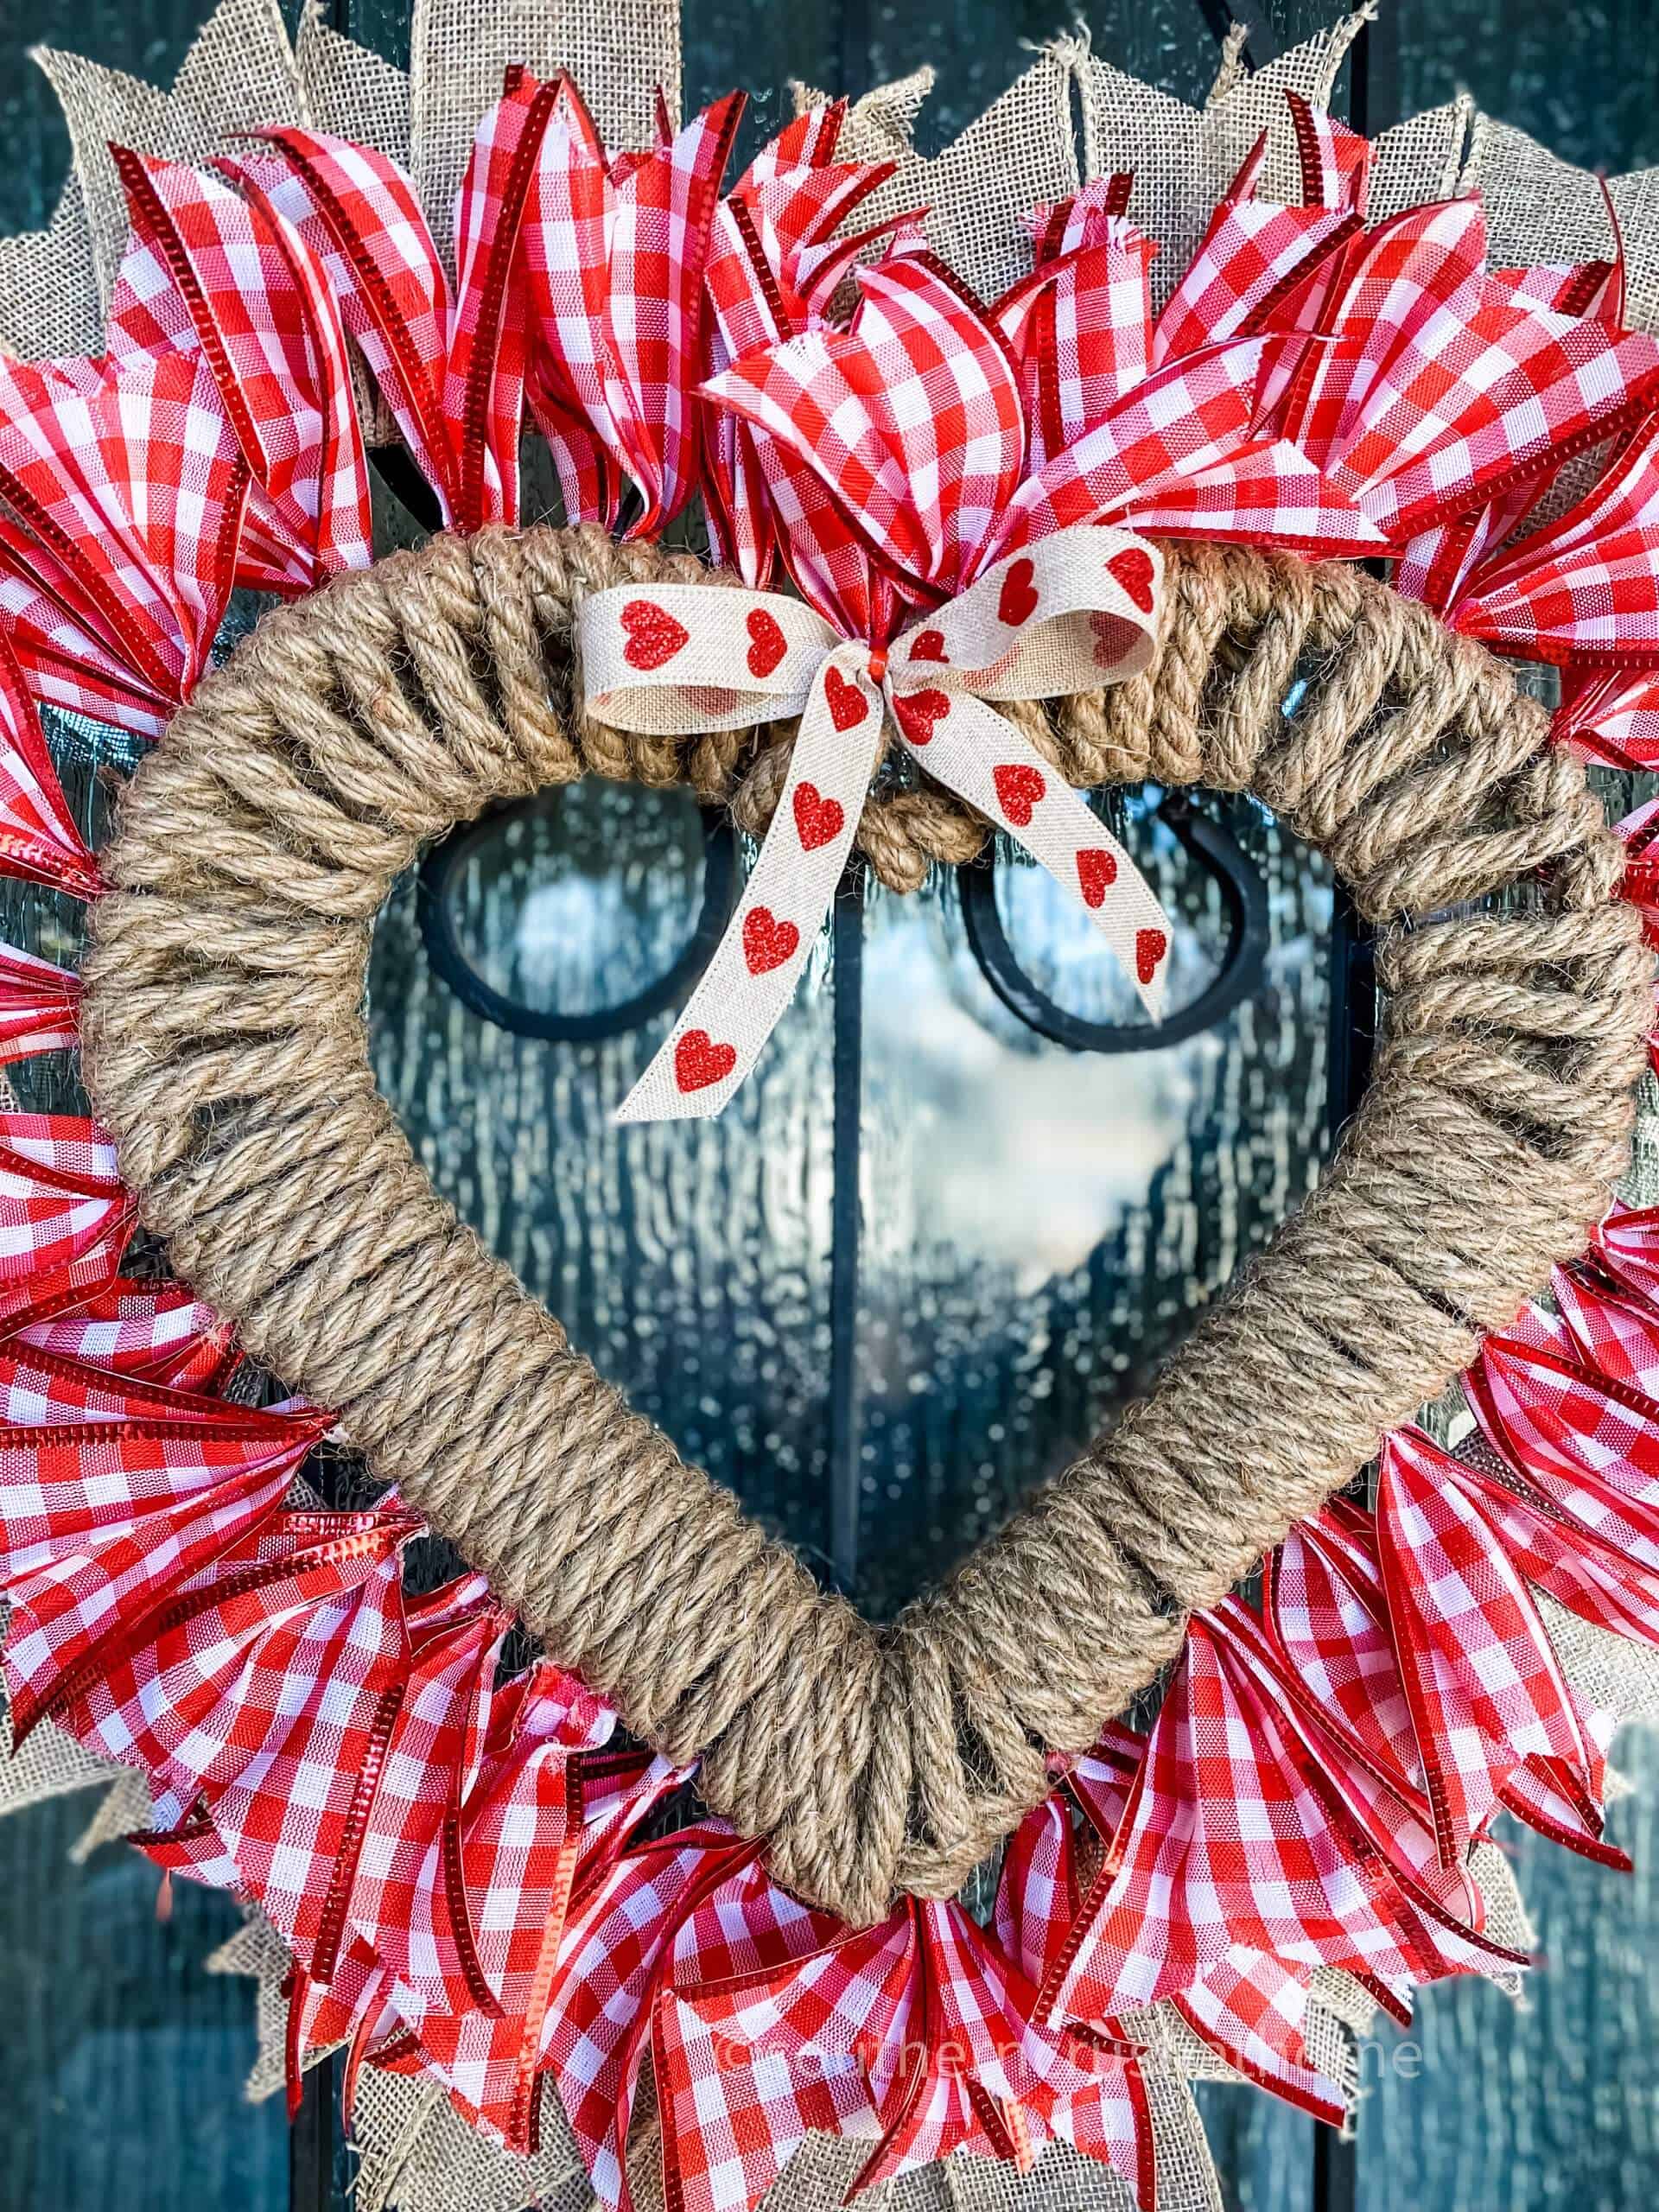 Valentine's Day Heart Wreath with FREE Tutorial